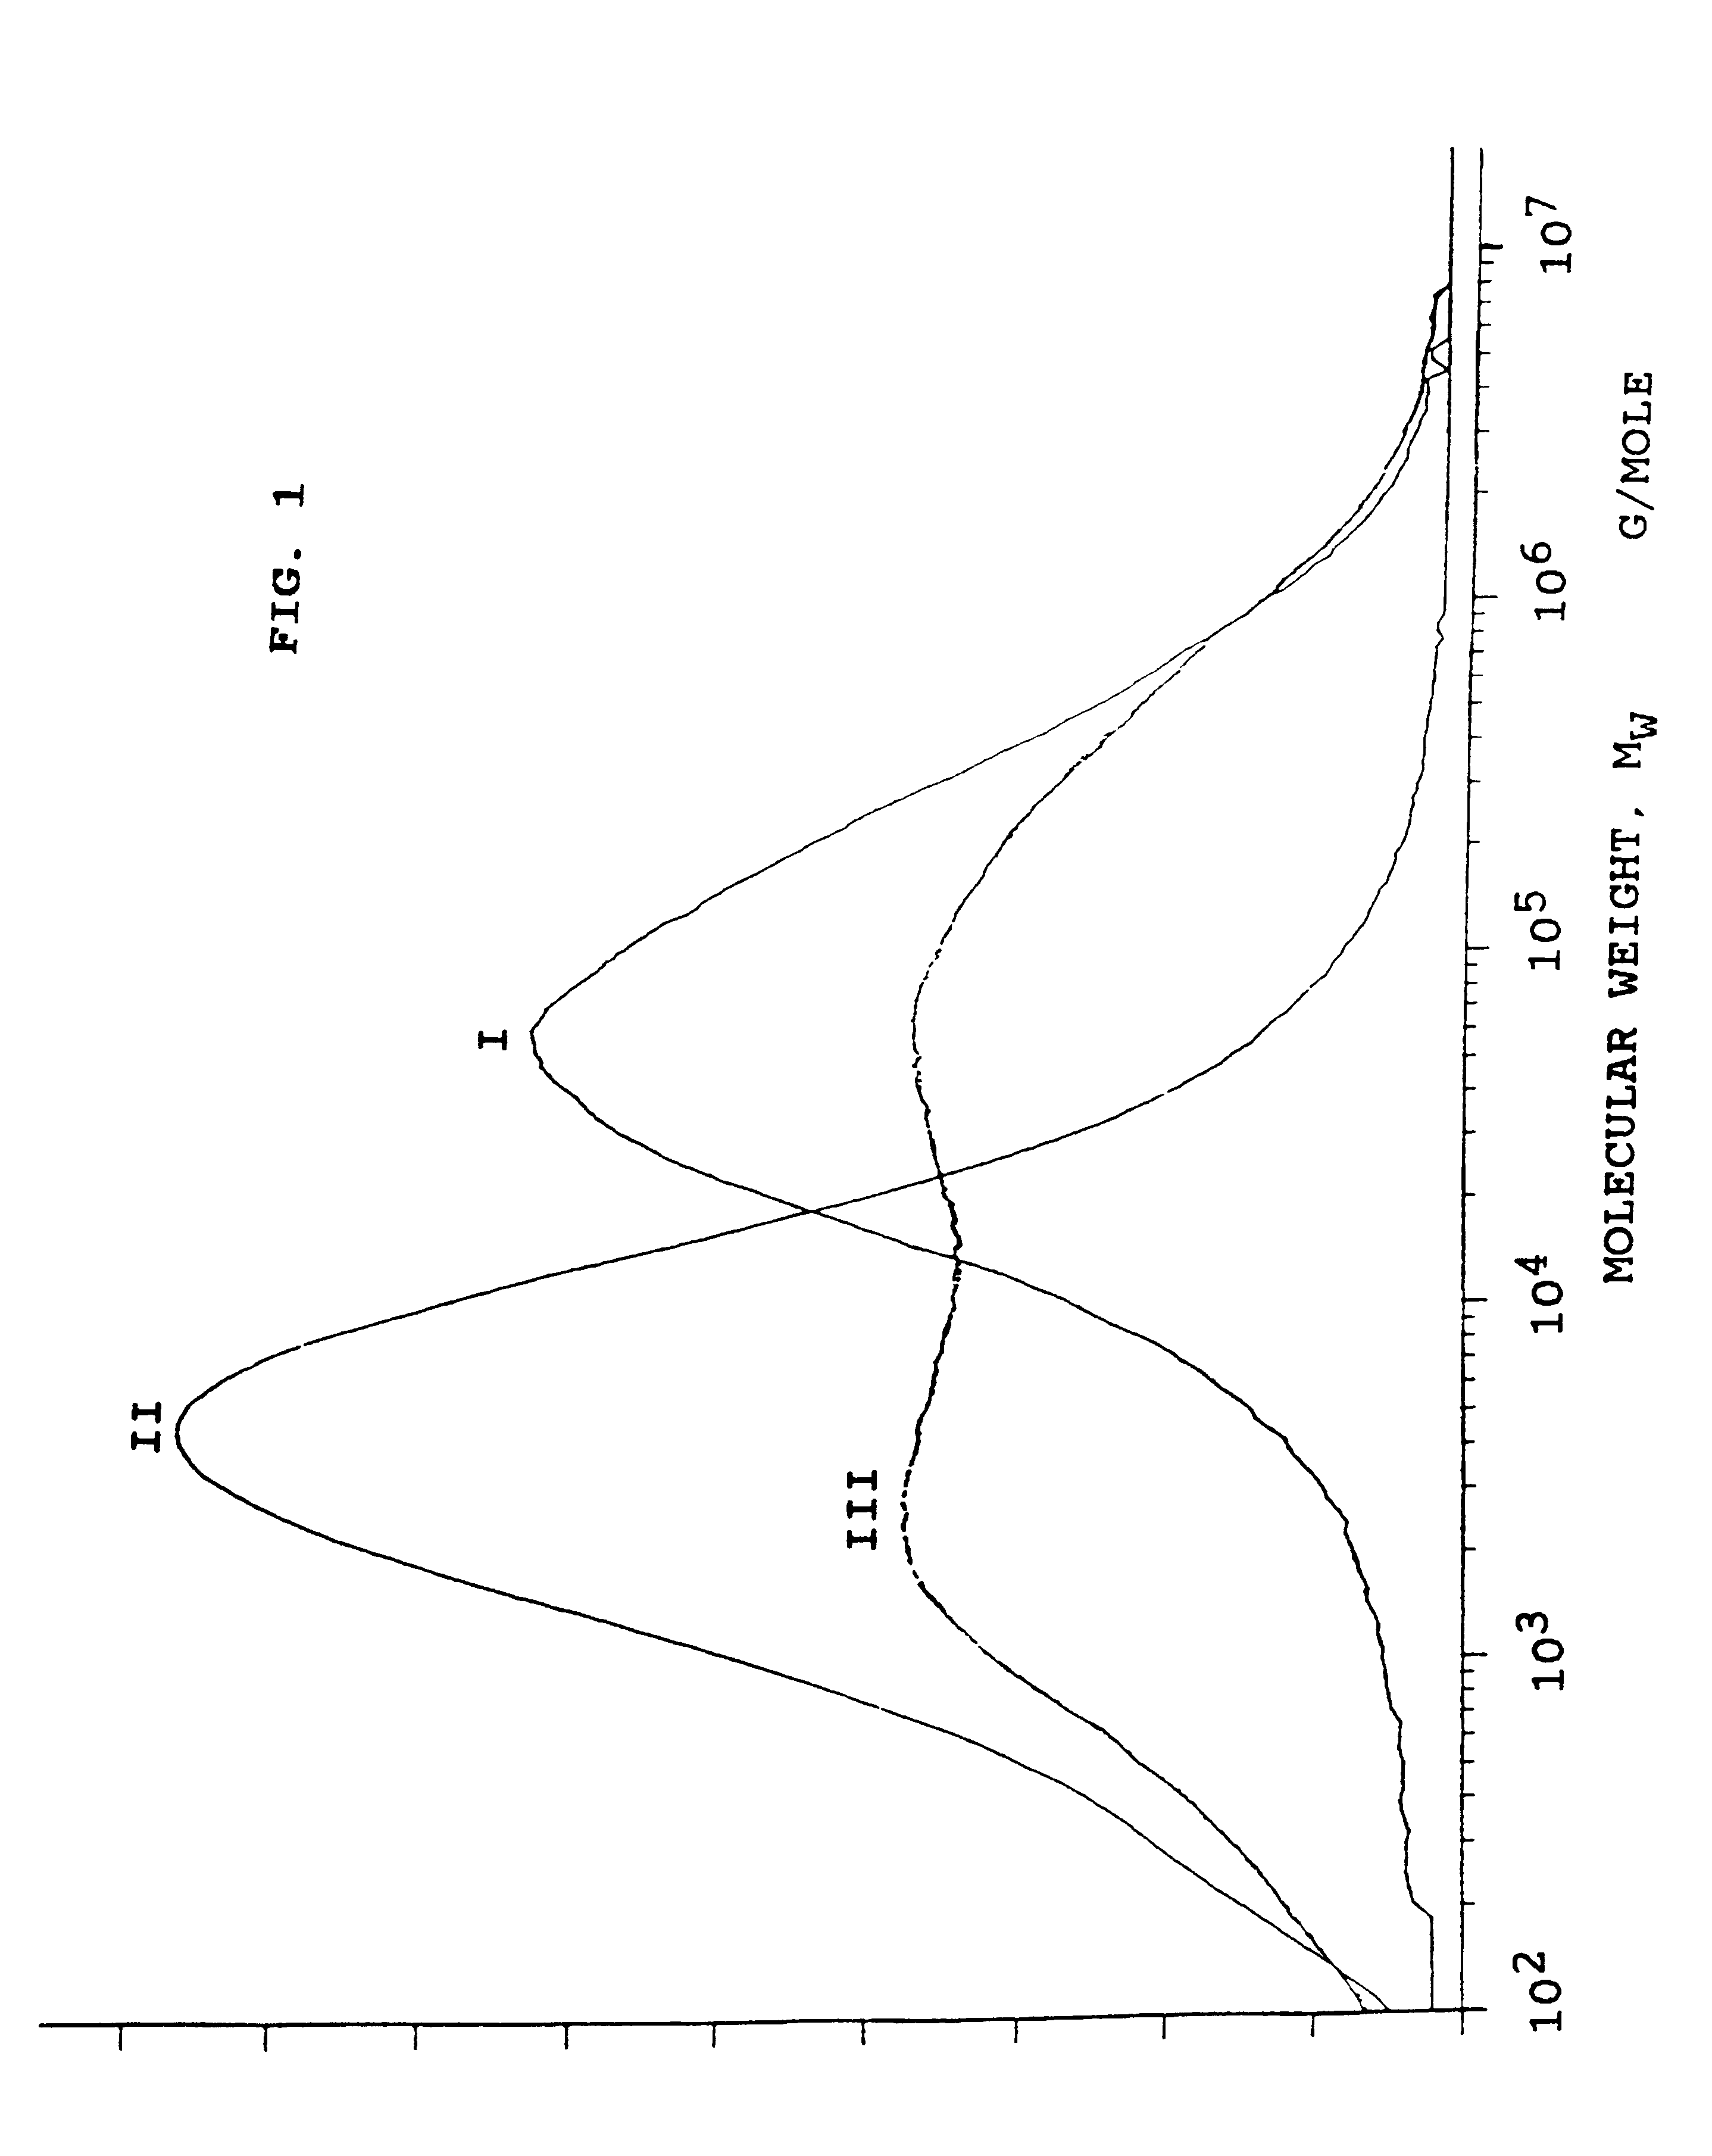 Process for producing polyethylenes having a broad molecular weight distribution, and a catalyst system used thereby